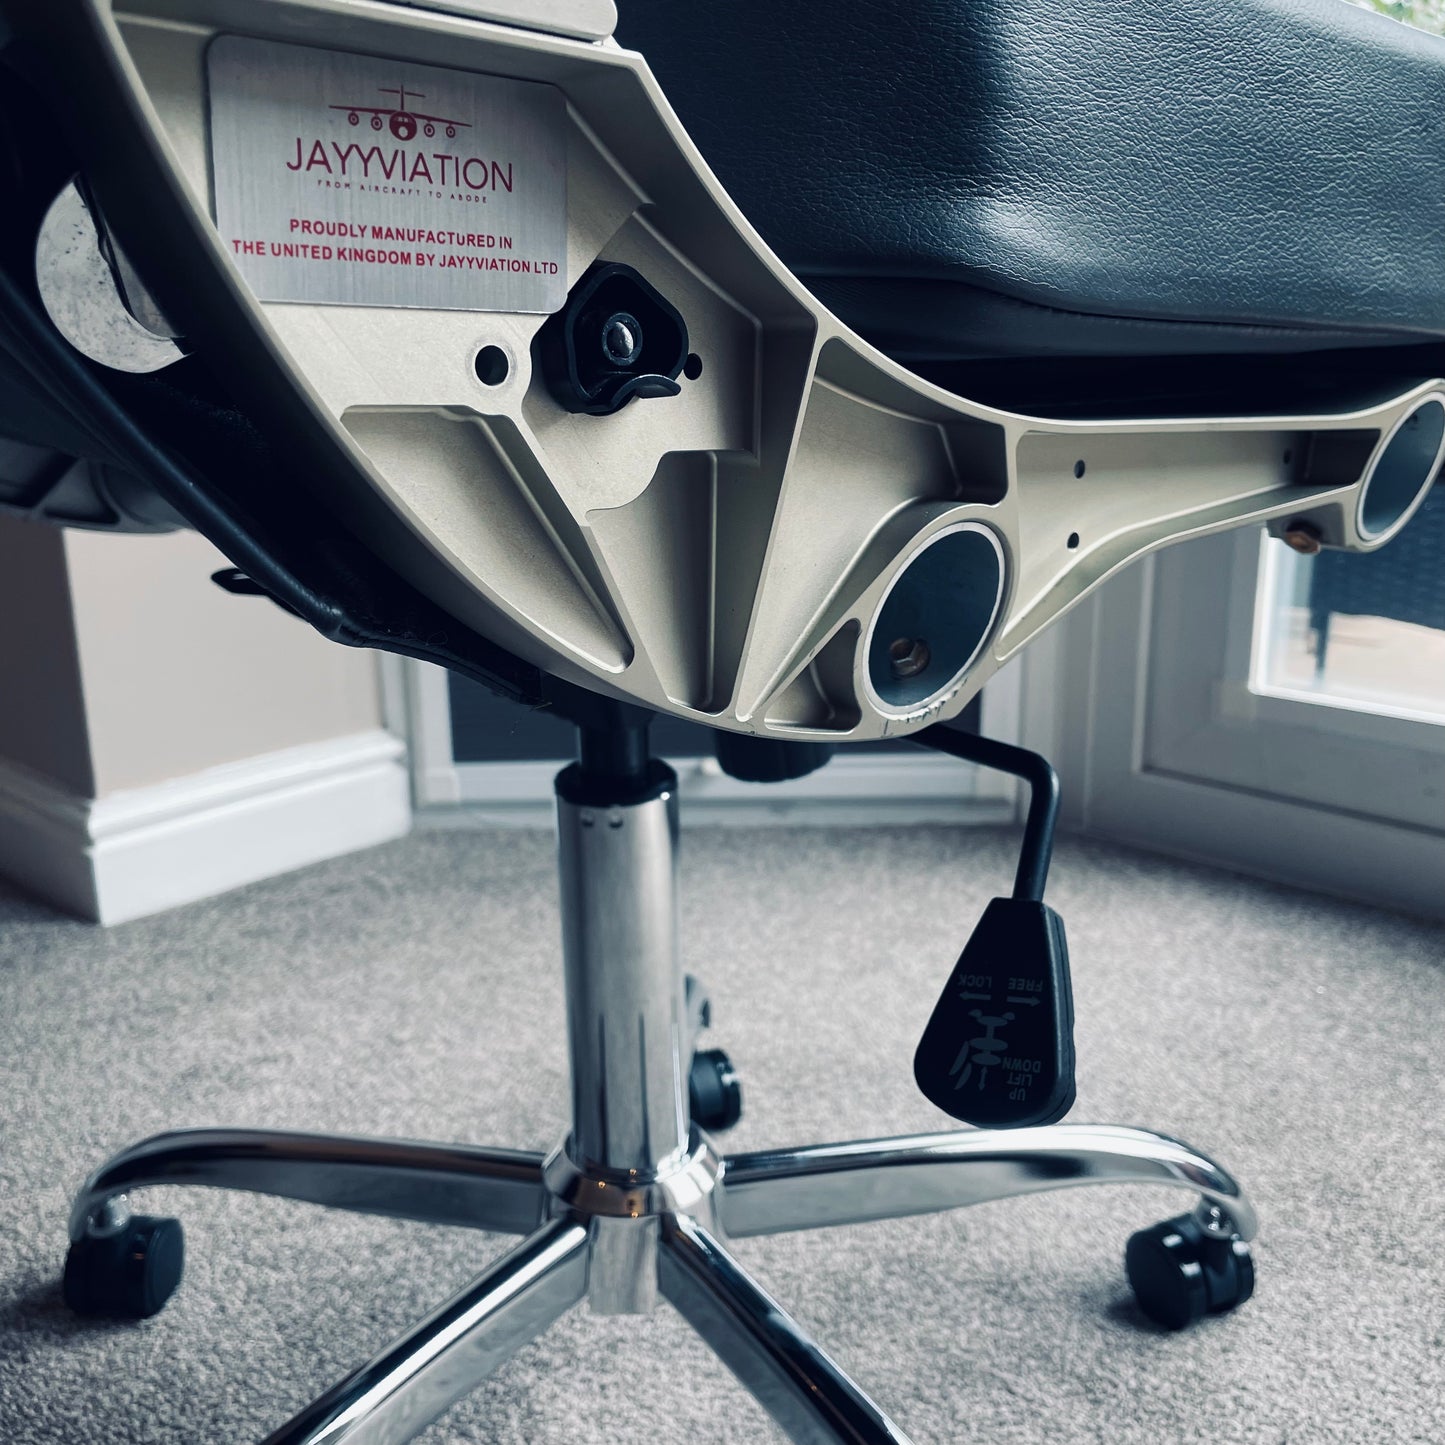 British Airways Cabin Seat Upcycled Office Desk Chair